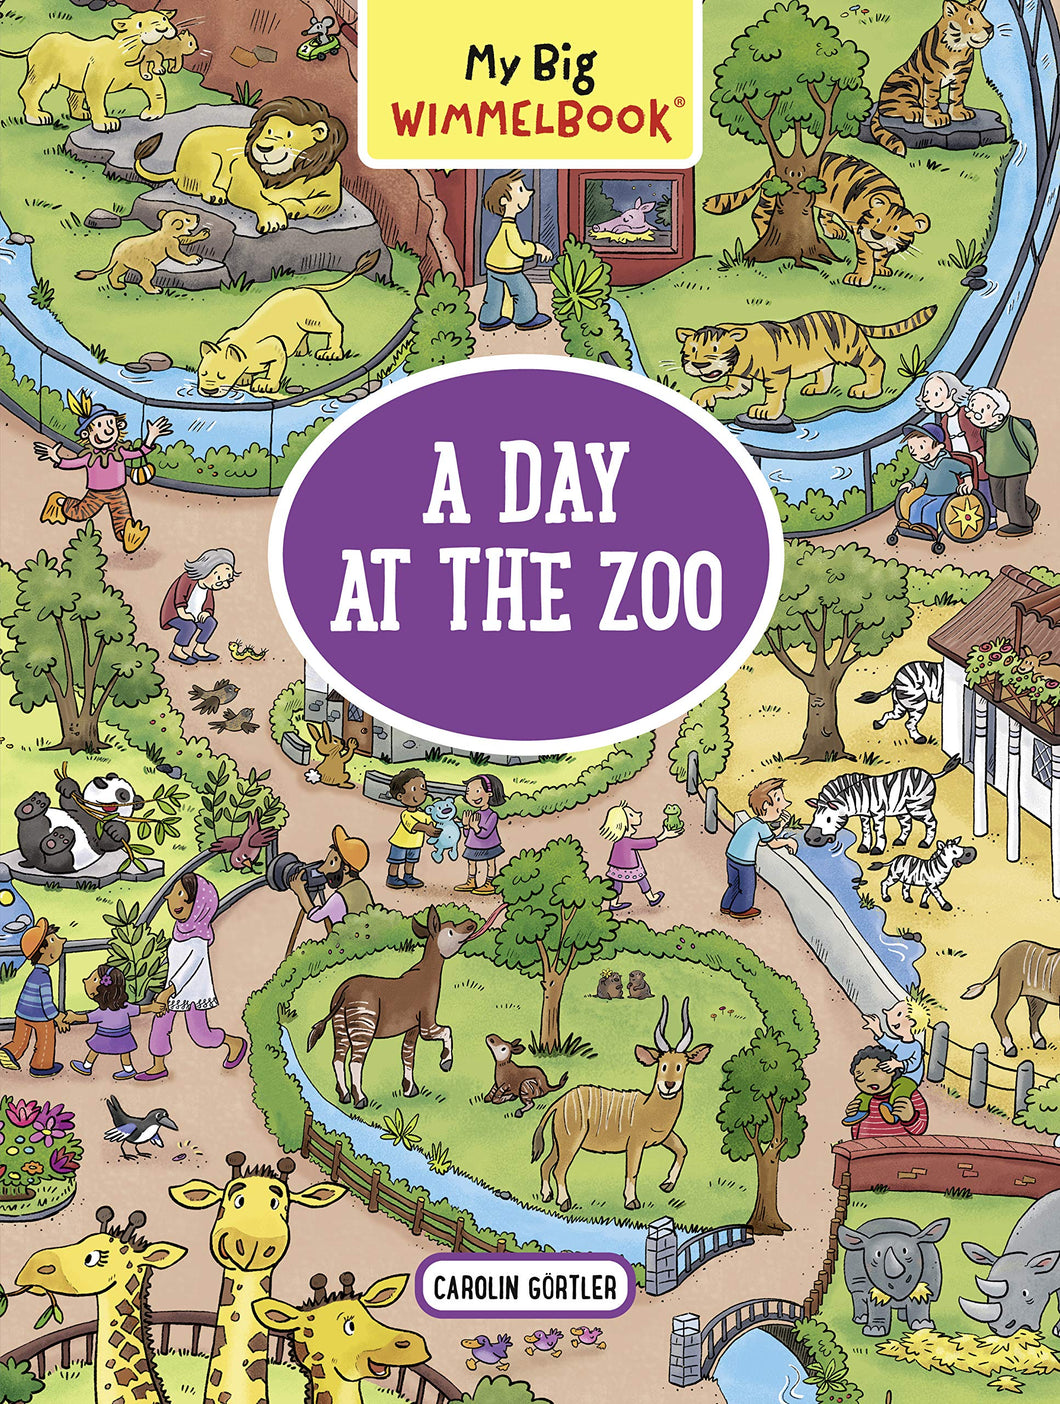 My Big Wimmelbook―A Day at the Zoo